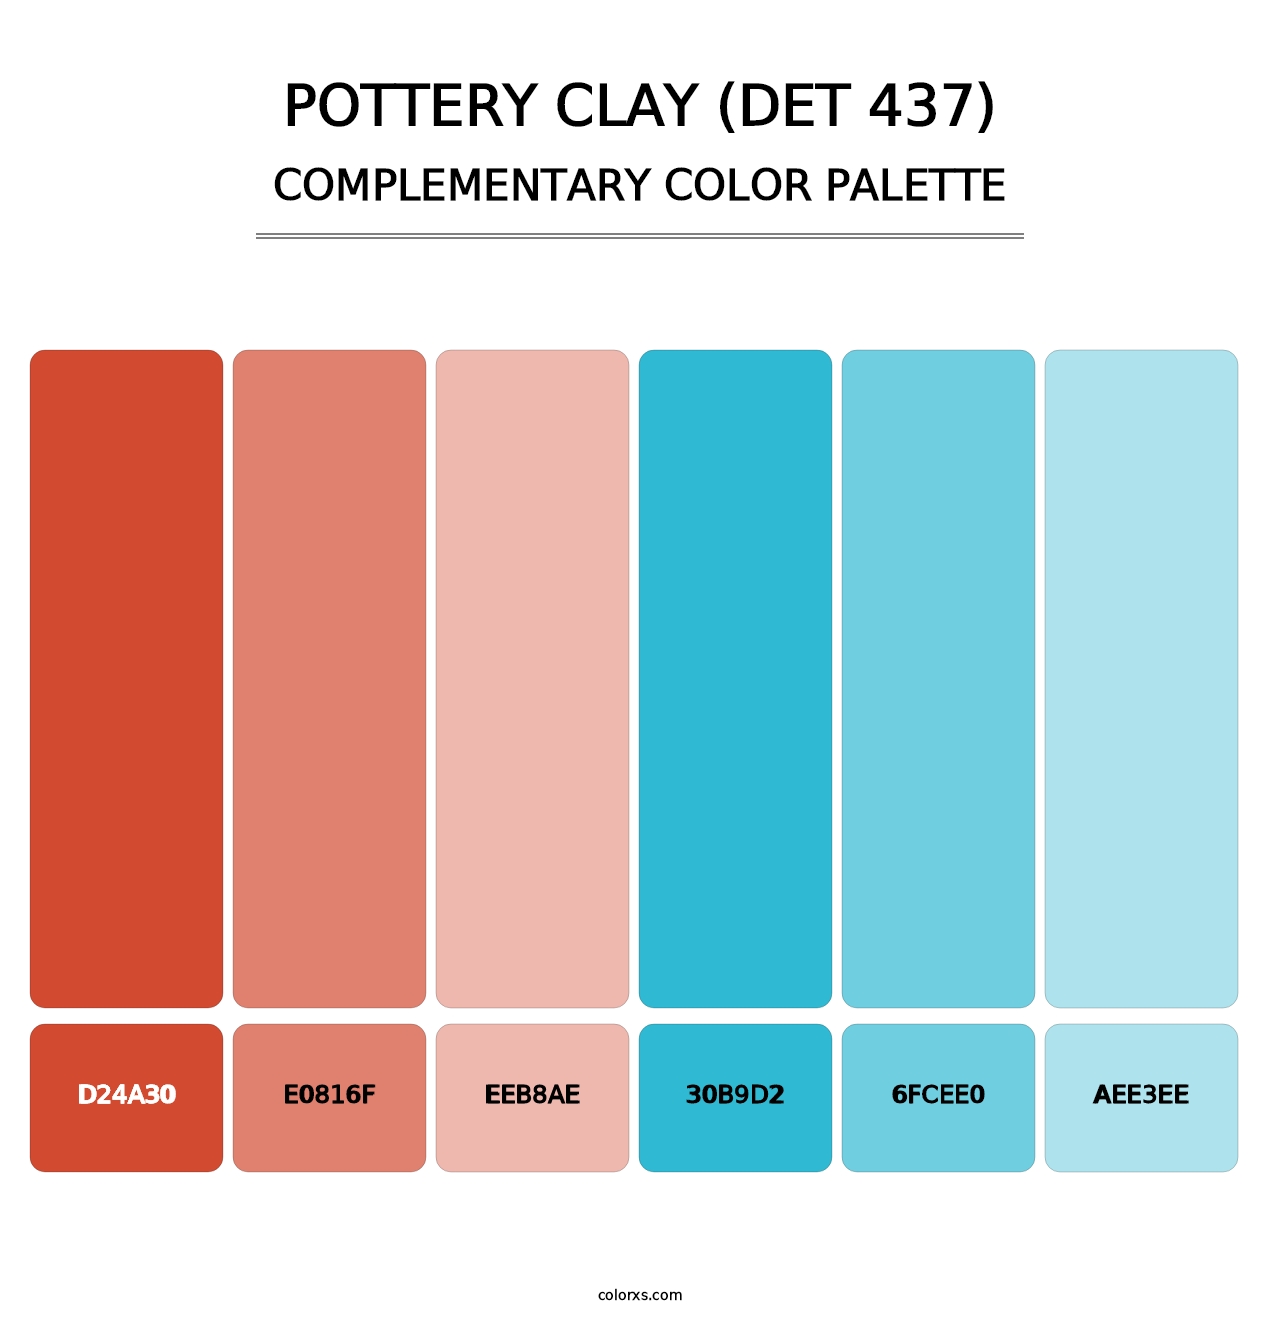 Pottery Clay (DET 437) - Complementary Color Palette